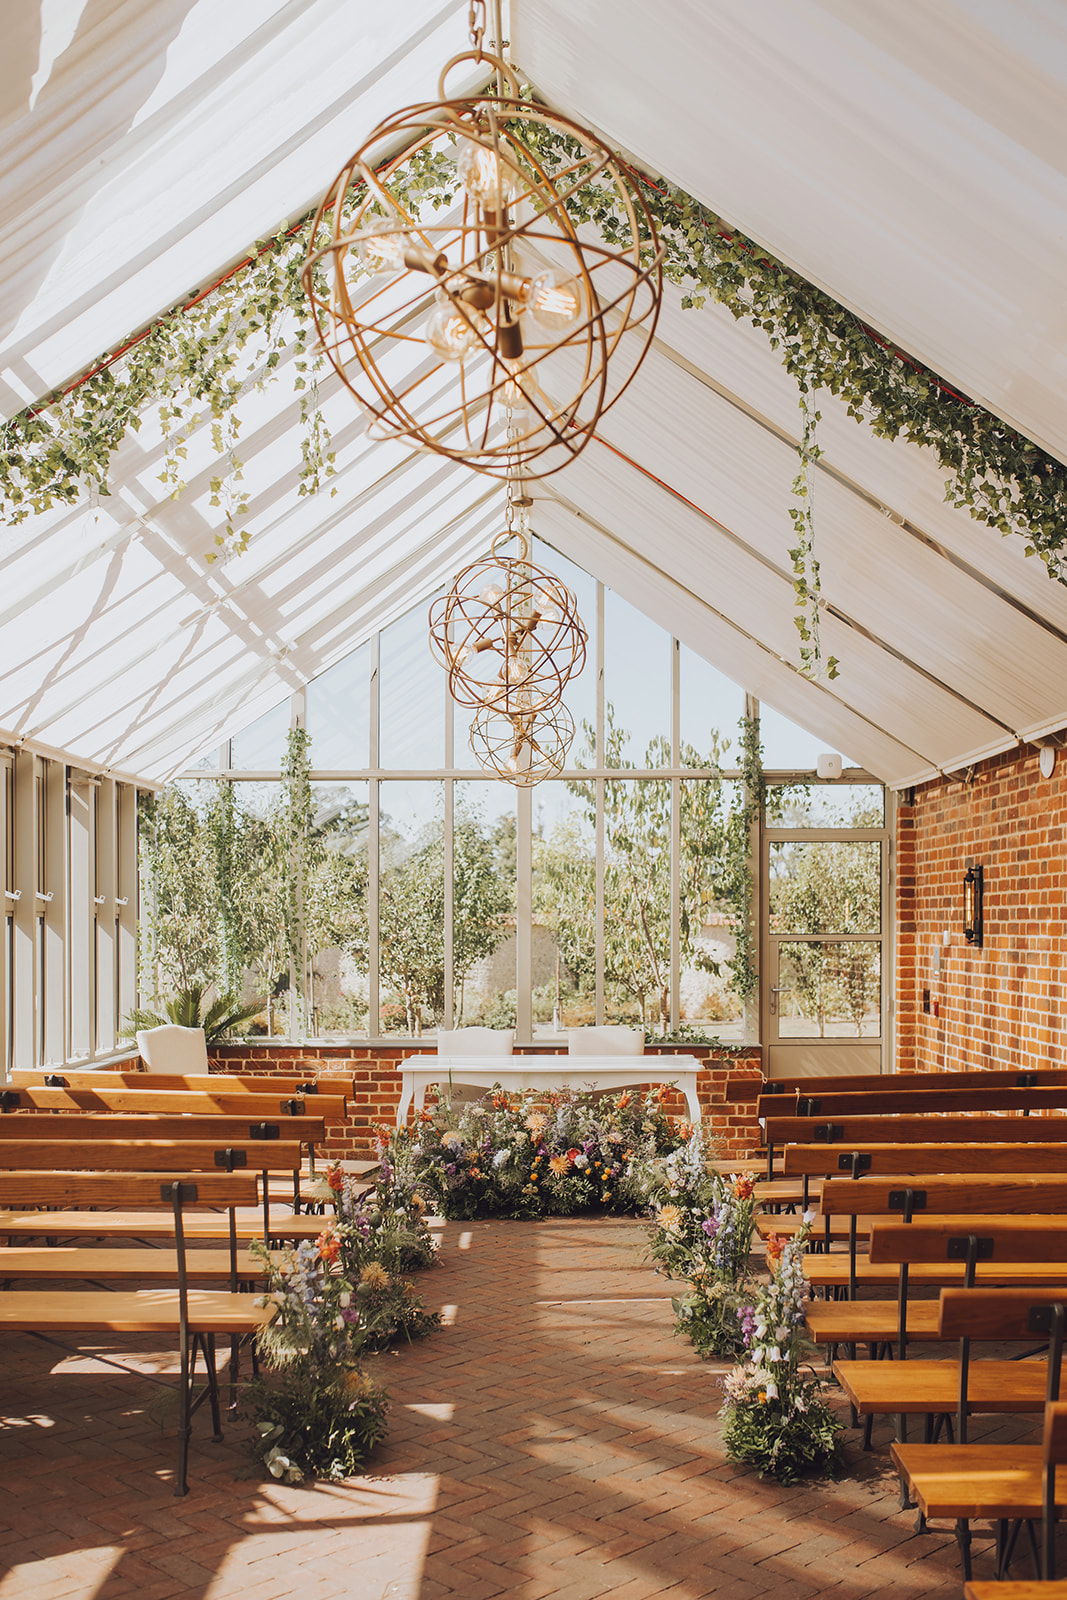 Summer glasshouse wedding at Syrencot with colourful floral decor